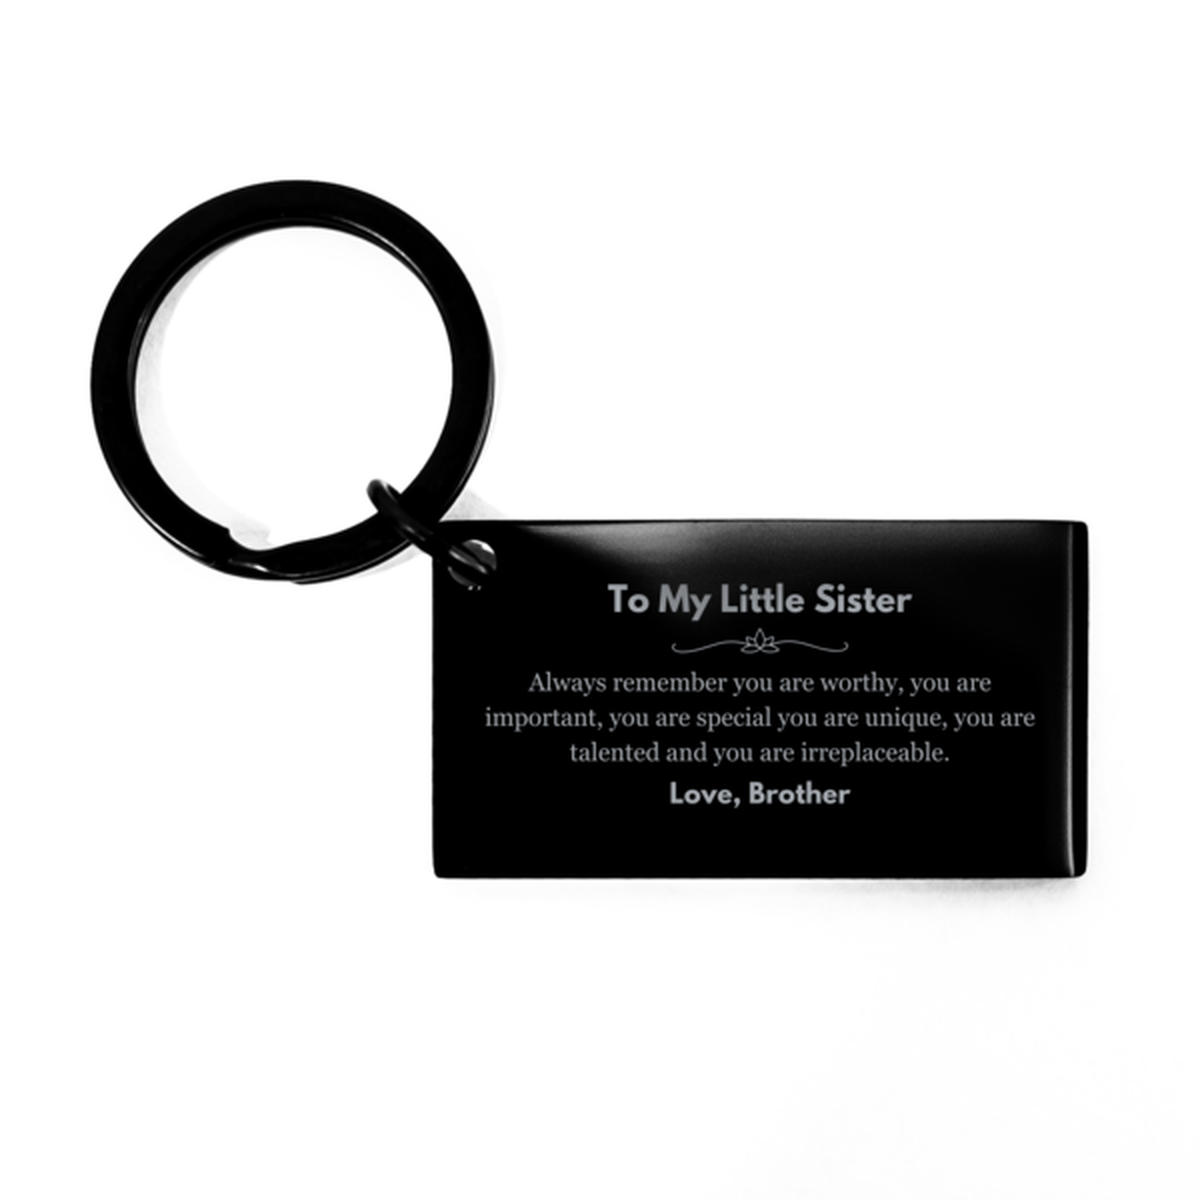 Little Sister Birthday Gifts from Brother, Inspirational Keychain for Little Sister Christmas Graduation Gifts for Little Sister Always remember you are worthy, you are important. Love, Brother